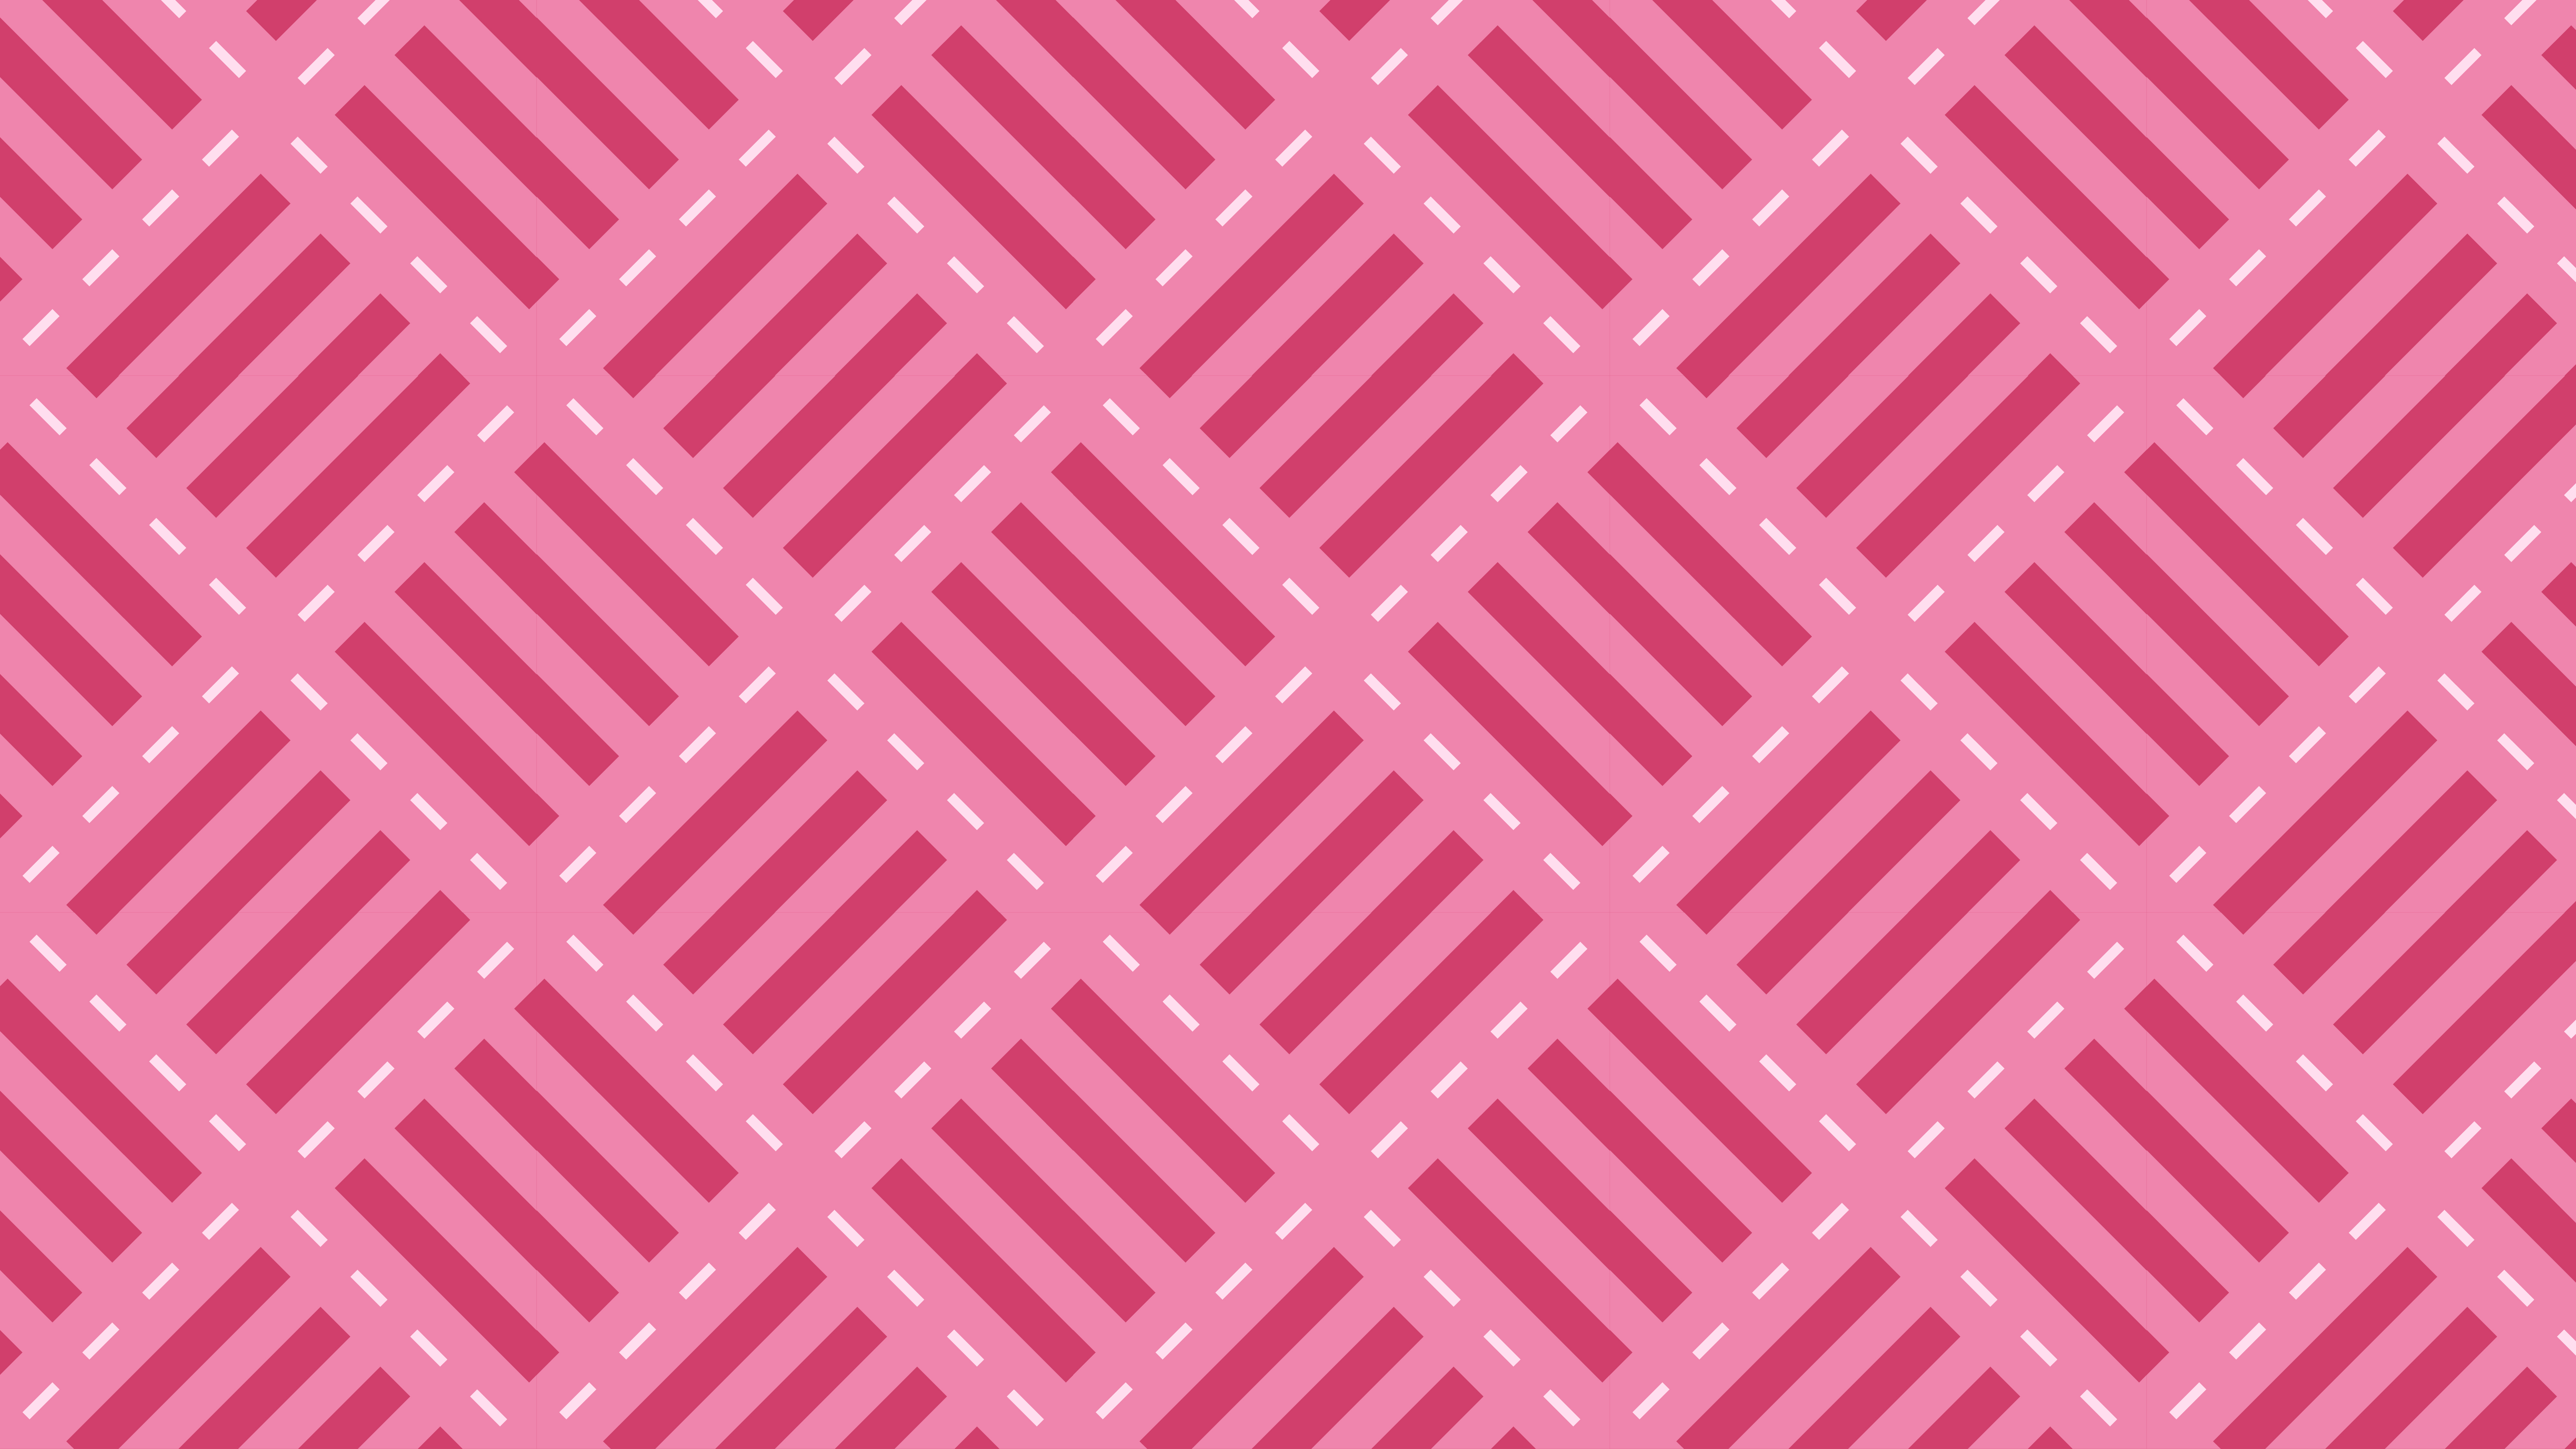 Free Pink Seamless Stripes Background Pattern Vector Image